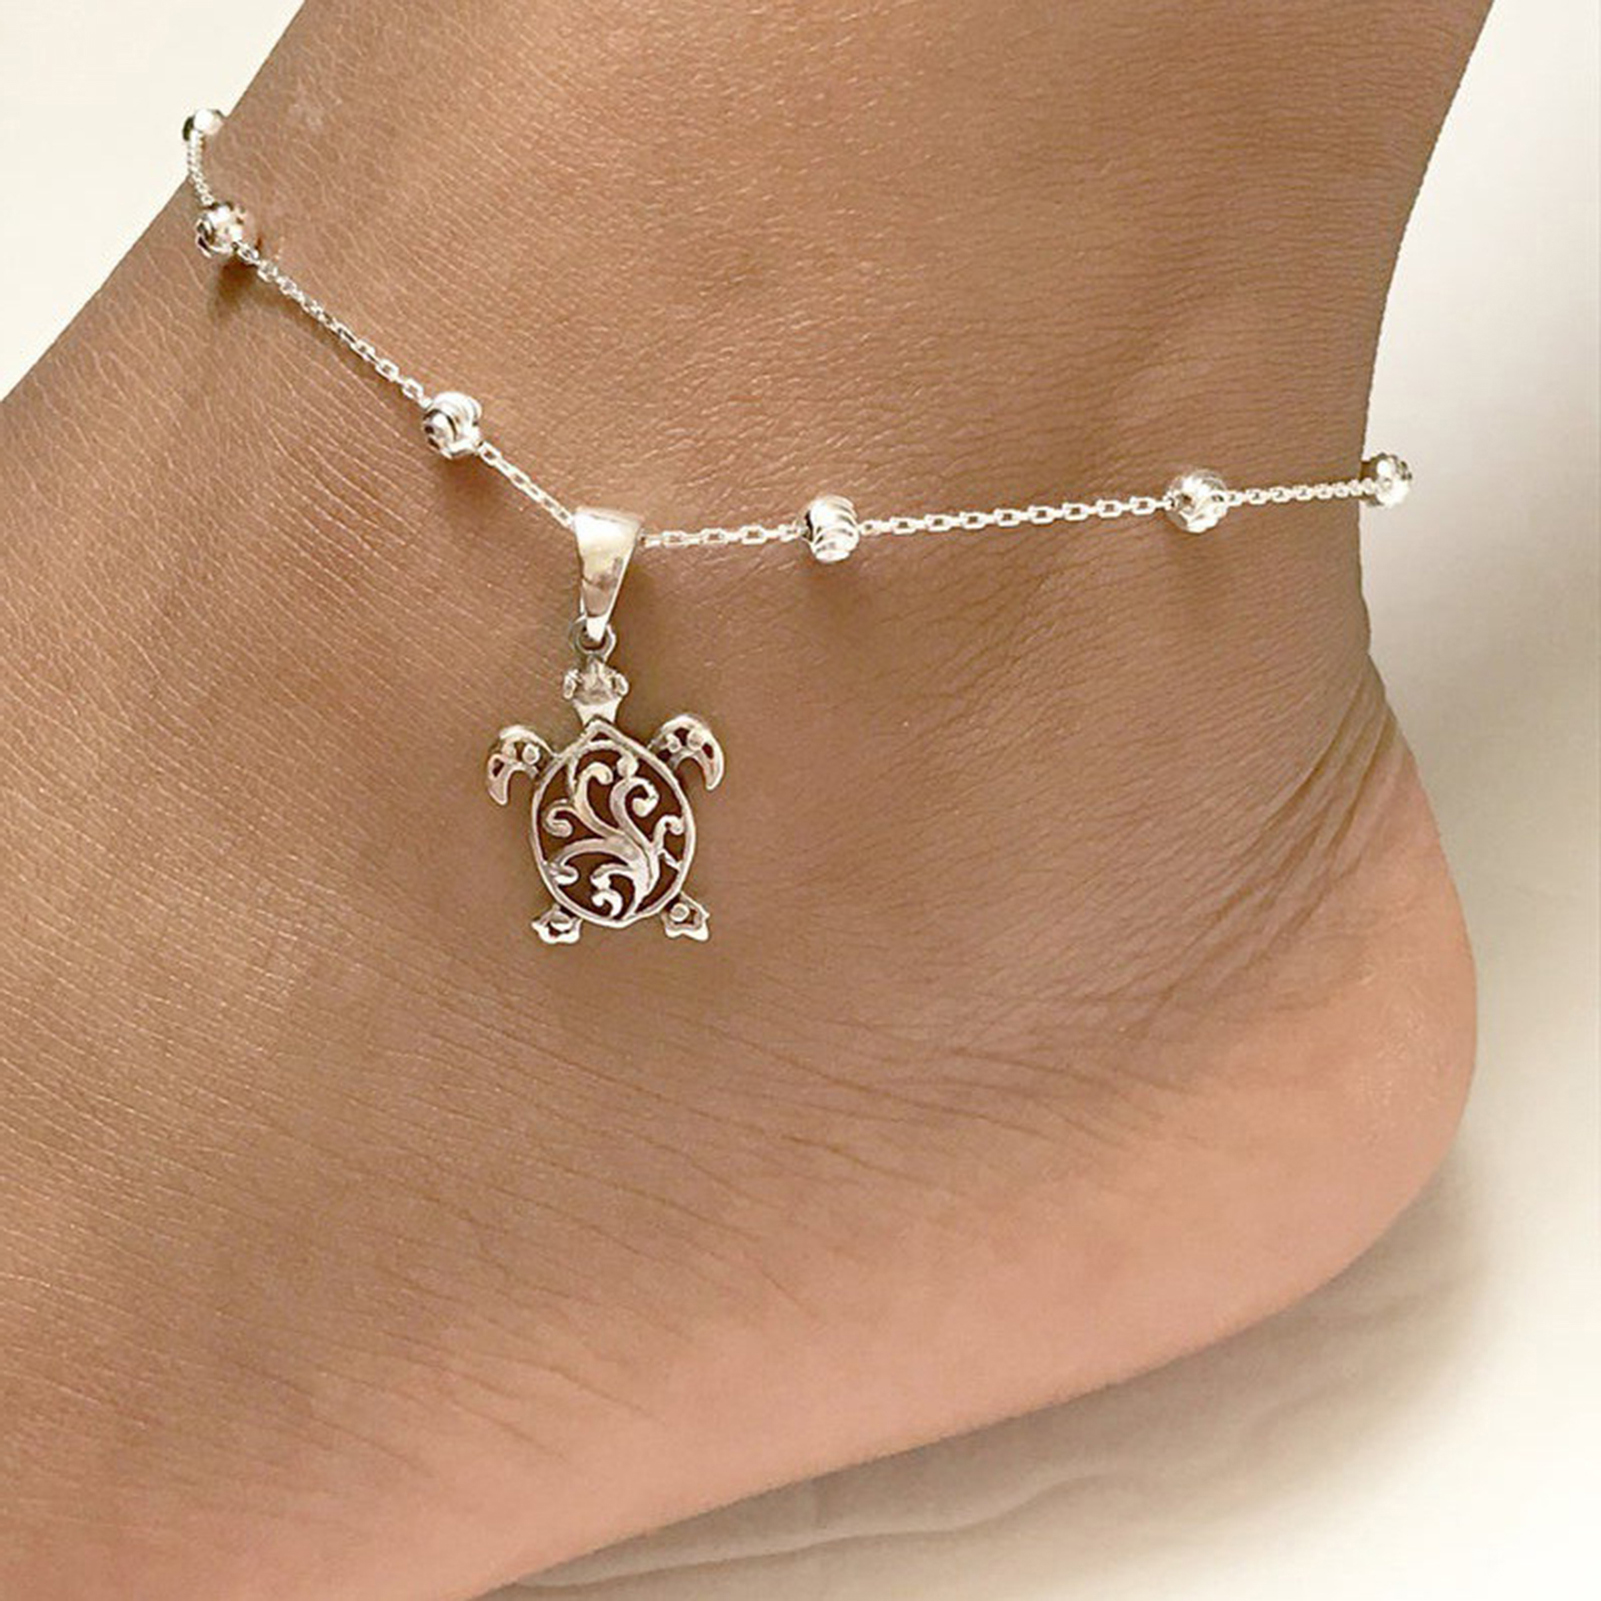 OneSight Blue Opal Sea Turtle Ankle Bracelet Sterling Silver Anklet Jewelry for Women Gifts New Version 4 Level Adjustable Anklet (Large